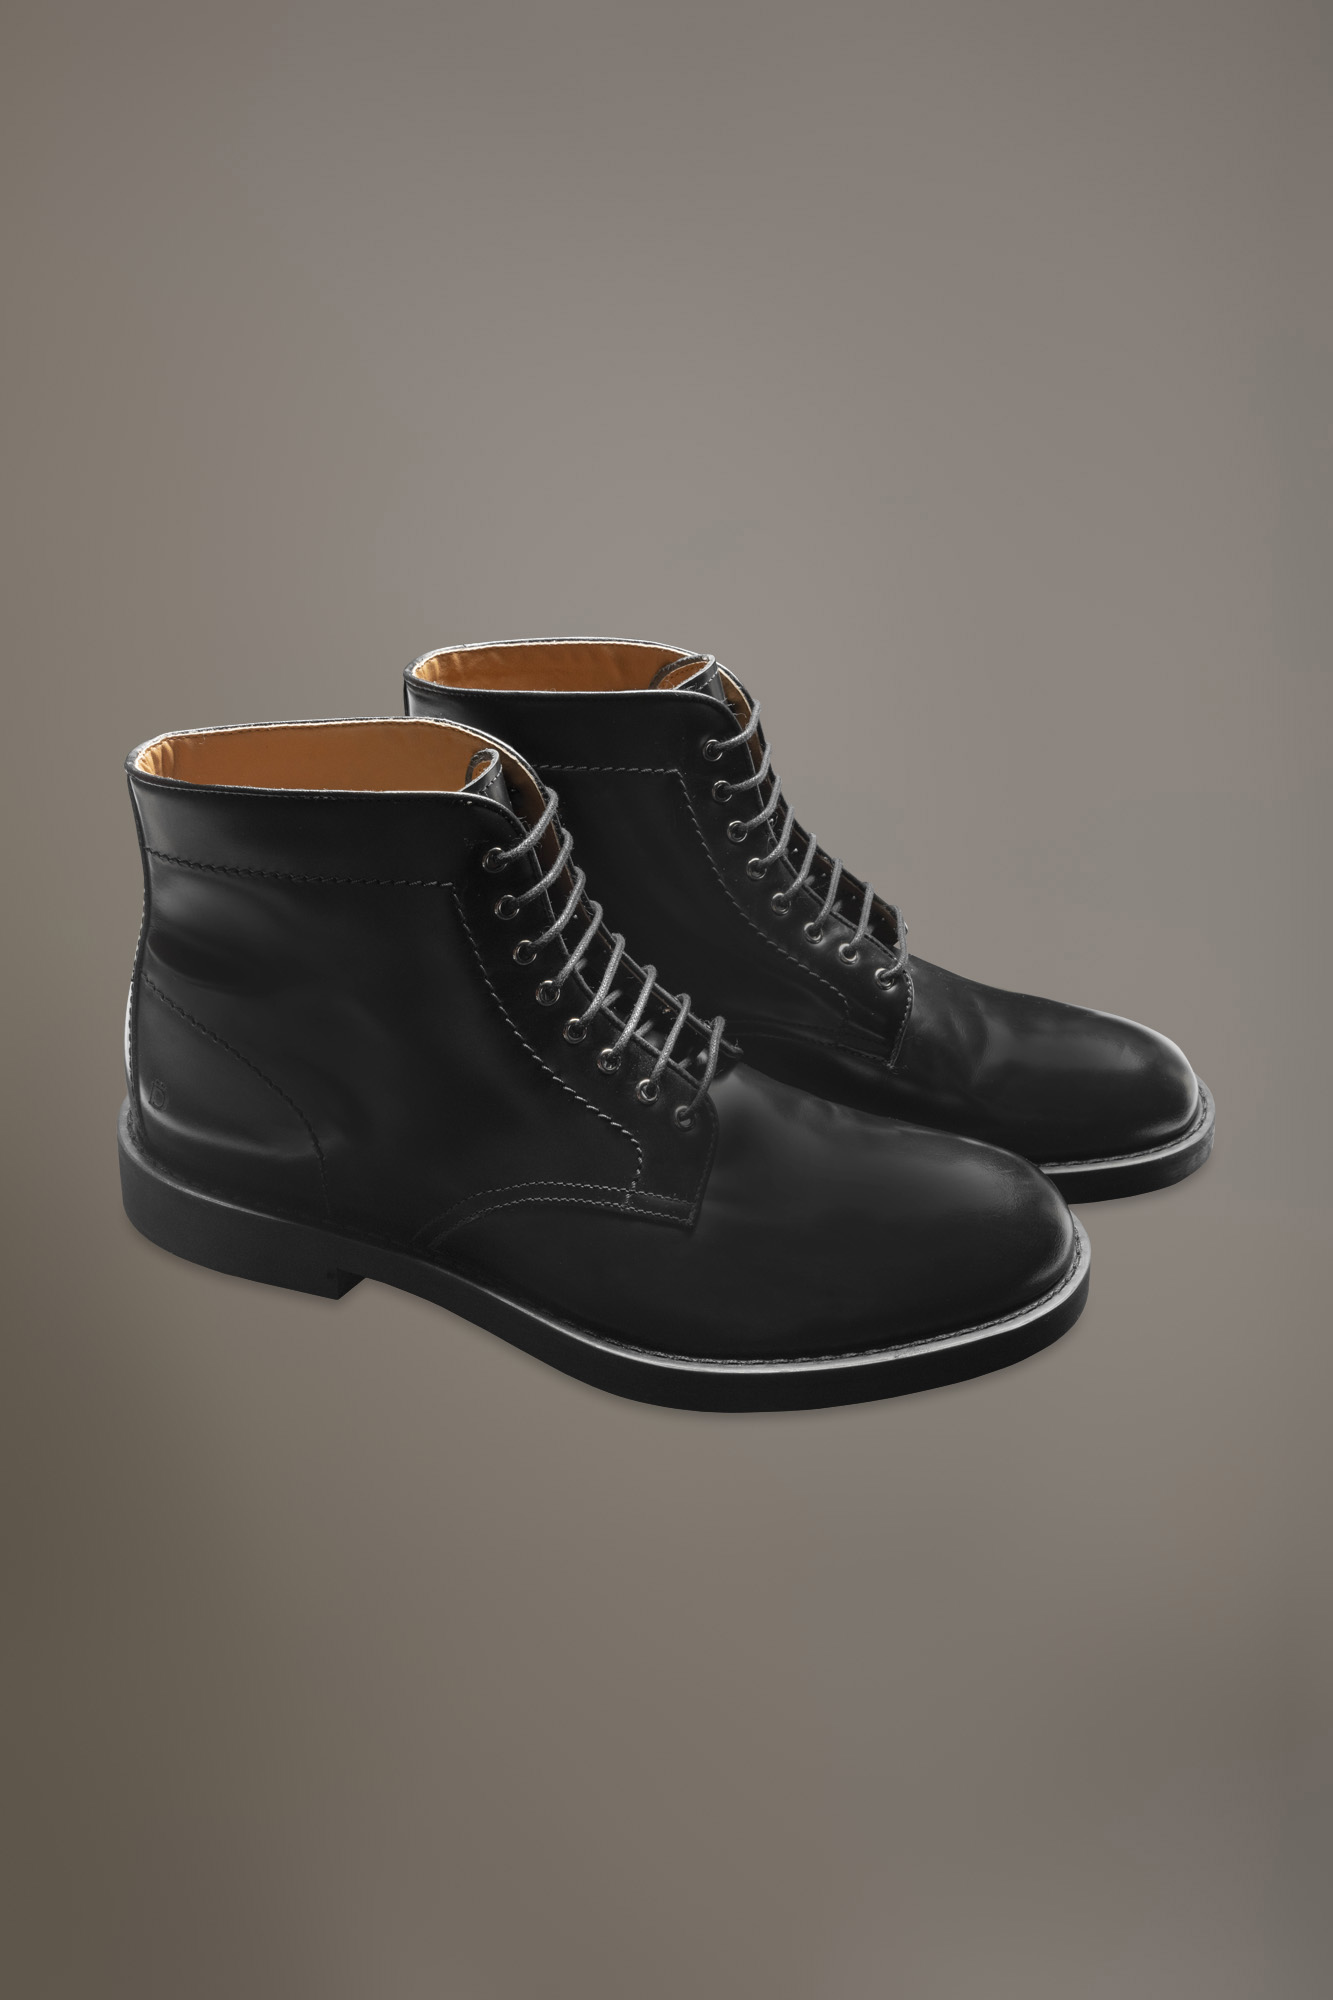 100% brushed leather boots with rubber sole